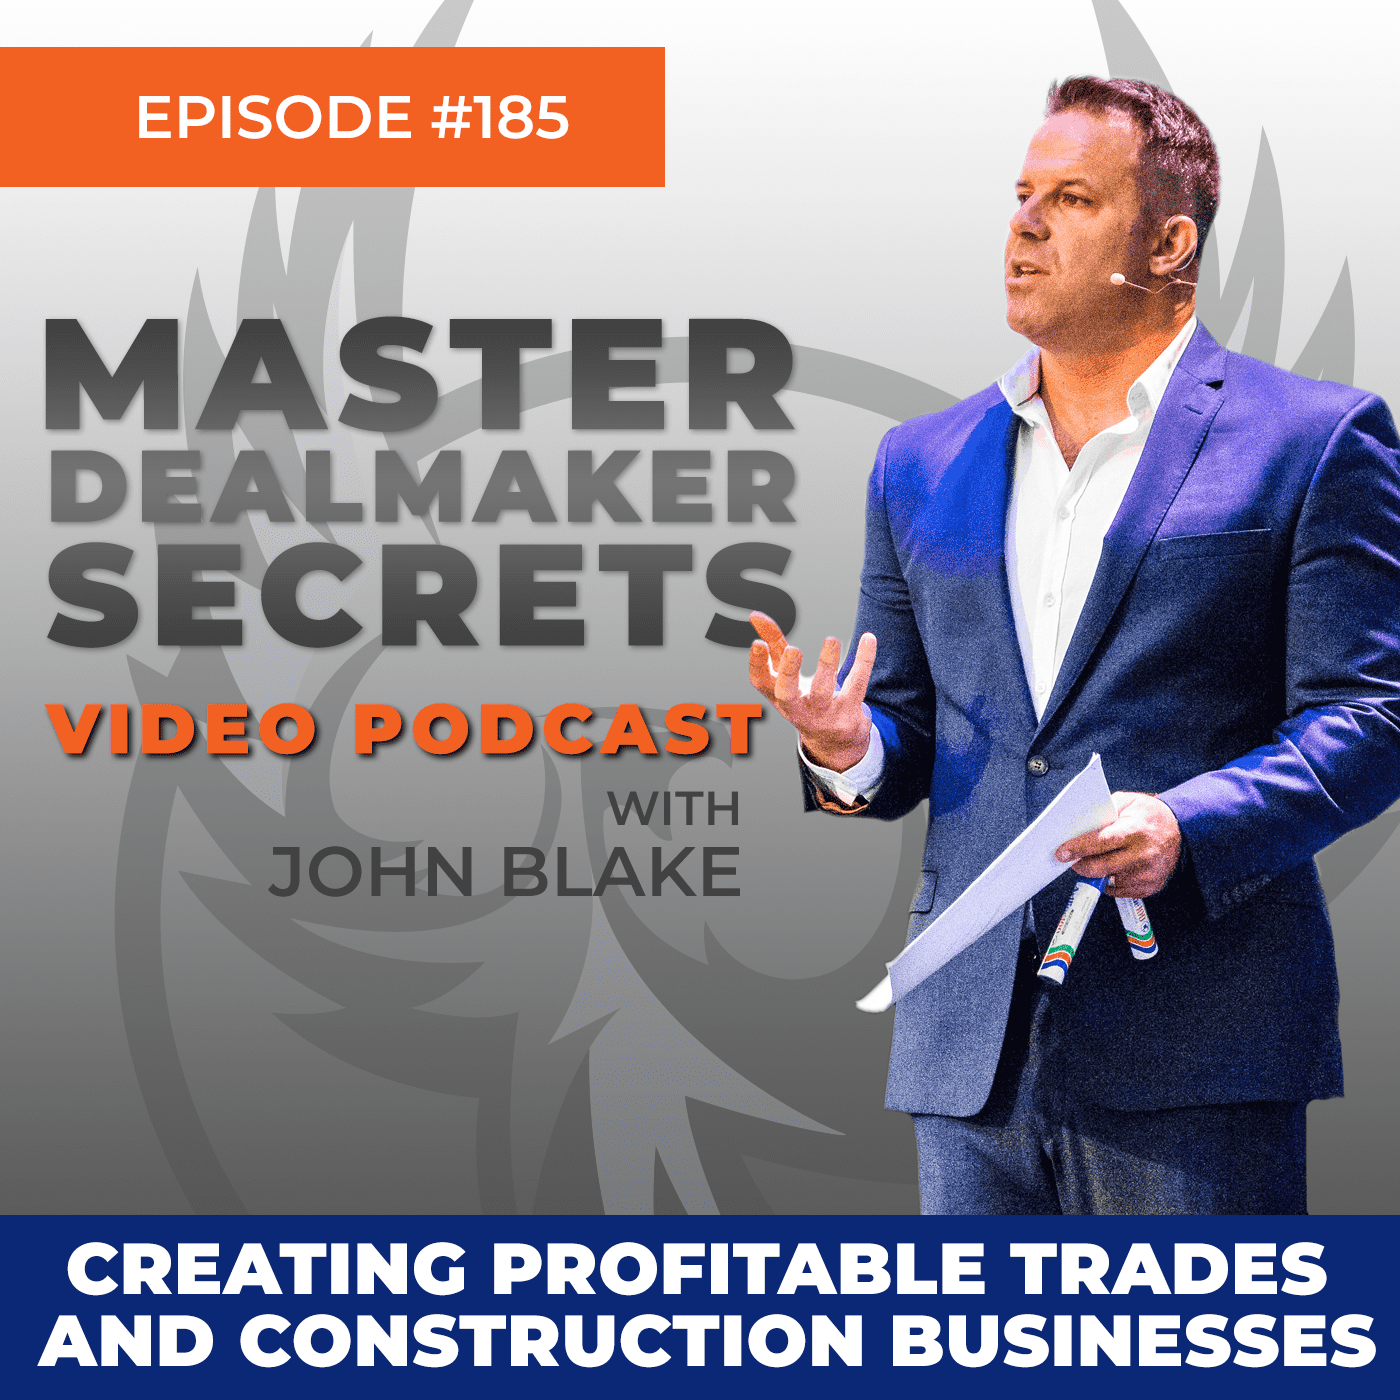 Episode number 1 hundred Eighty Five CREATING PROFITABLE TRADES AND CONSTRUCTION BUSINESSES with John Blake.